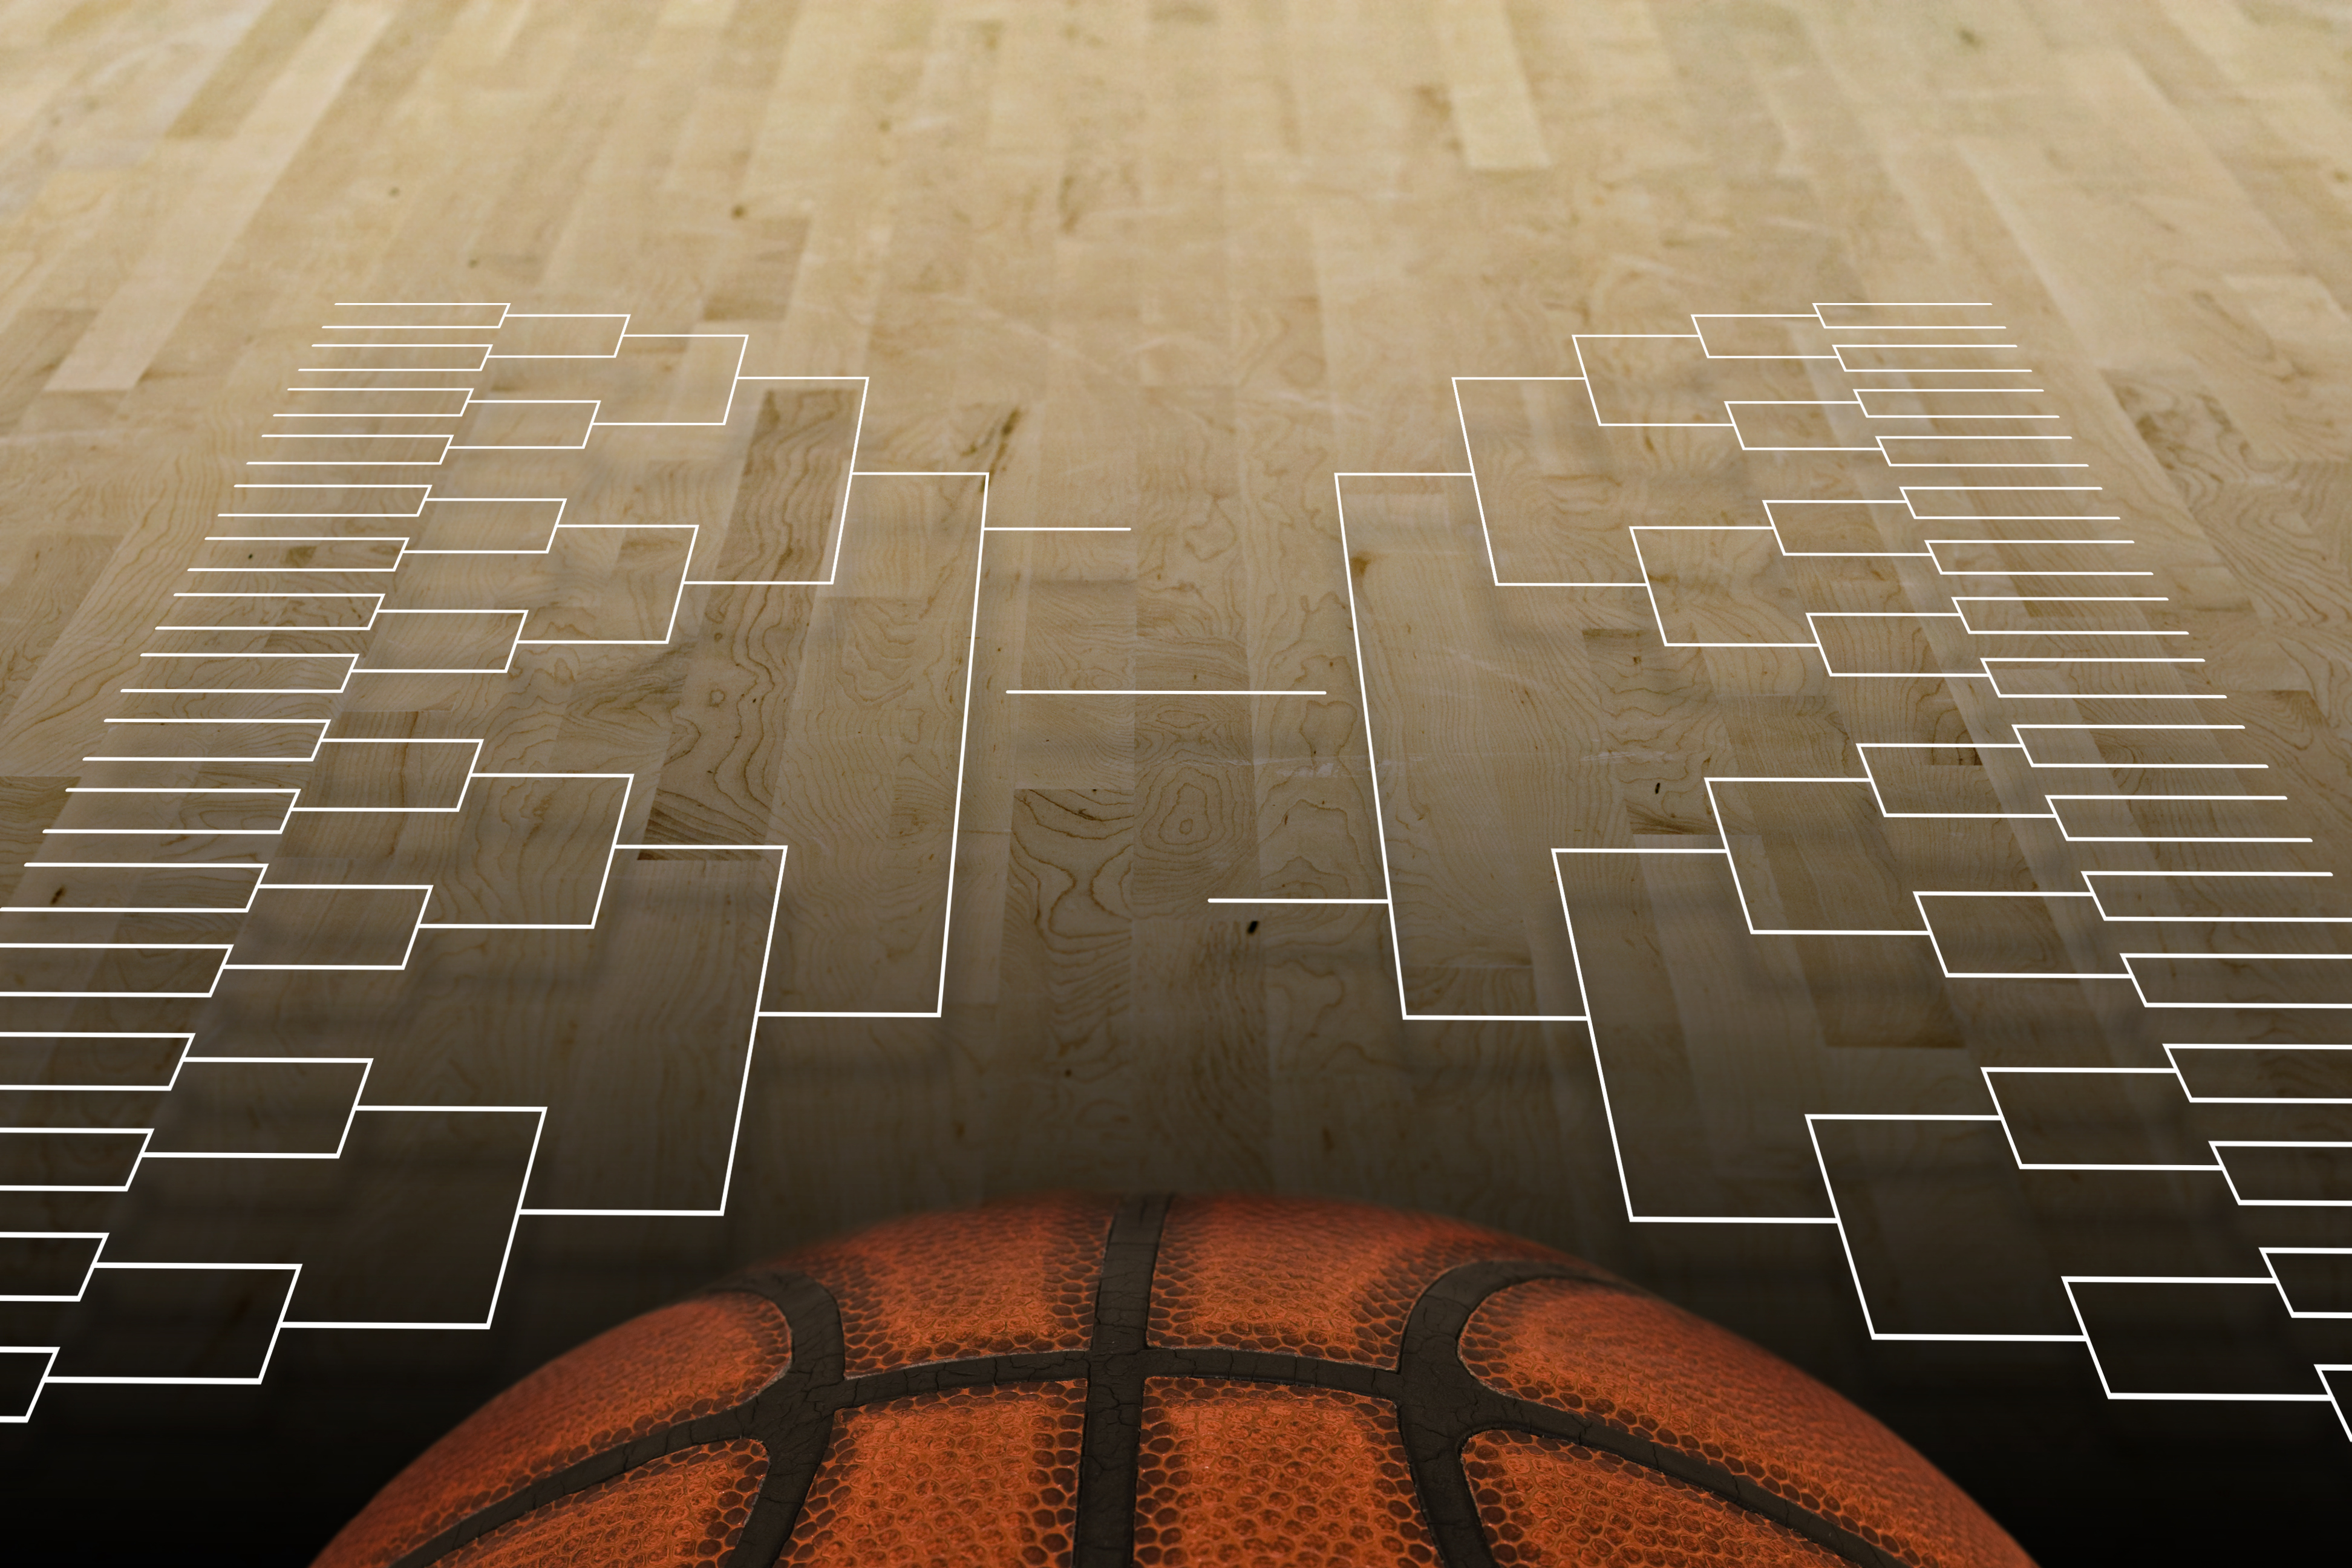 A basketball court with the grid of 64-team tournament on top. It's March Madness time!